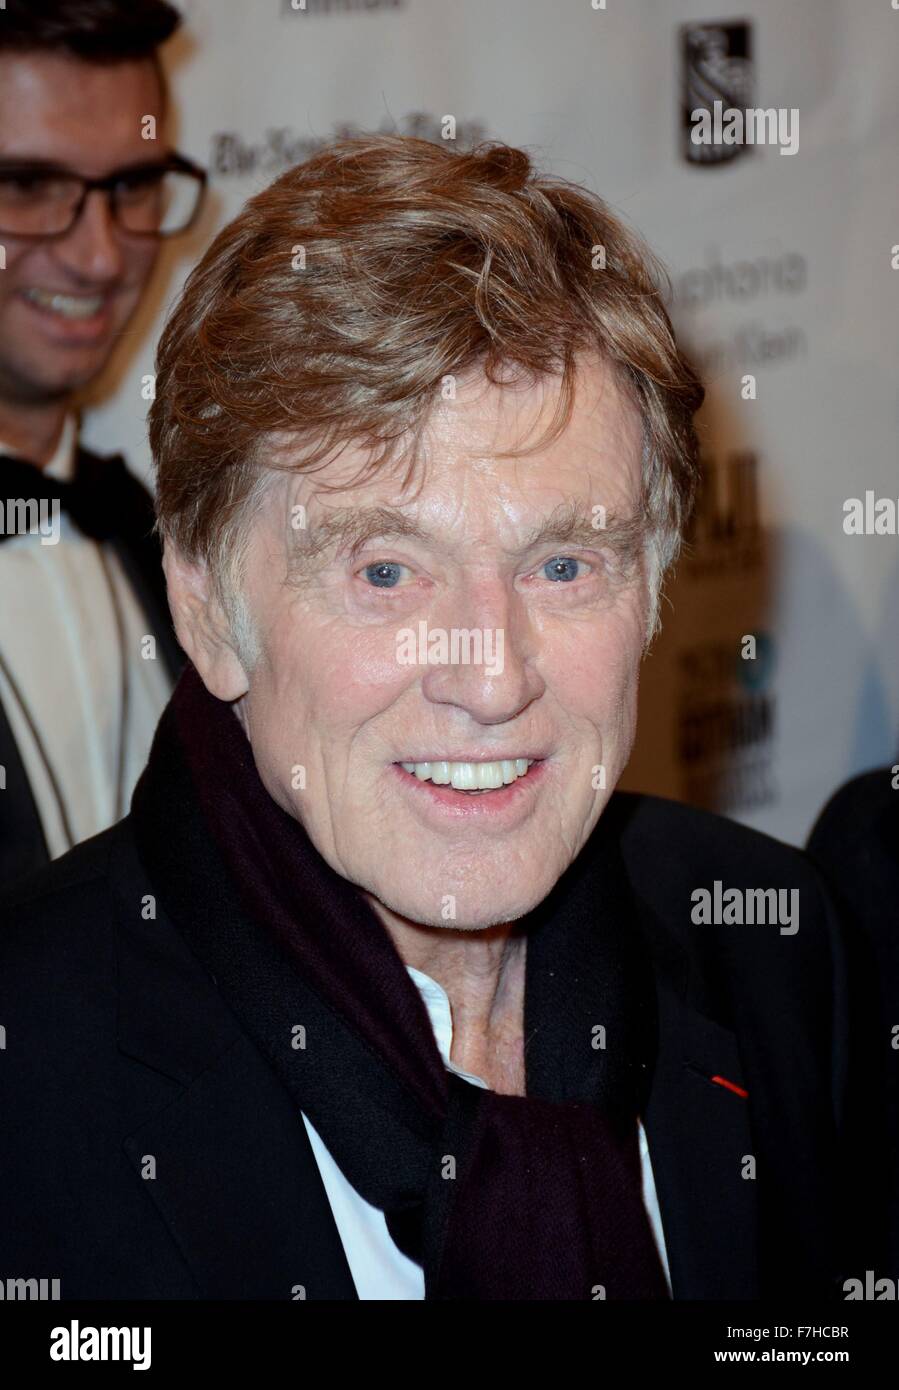 New York, NY, USA. 30th Nov, 2015. Robert Redford at arrivals for 25th Gotham Independent Film Awards, Cipriani Wall Street, New York, NY November 30, 2015. Credit:  Derek Storm/Everett Collection/Alamy Live News Stock Photo